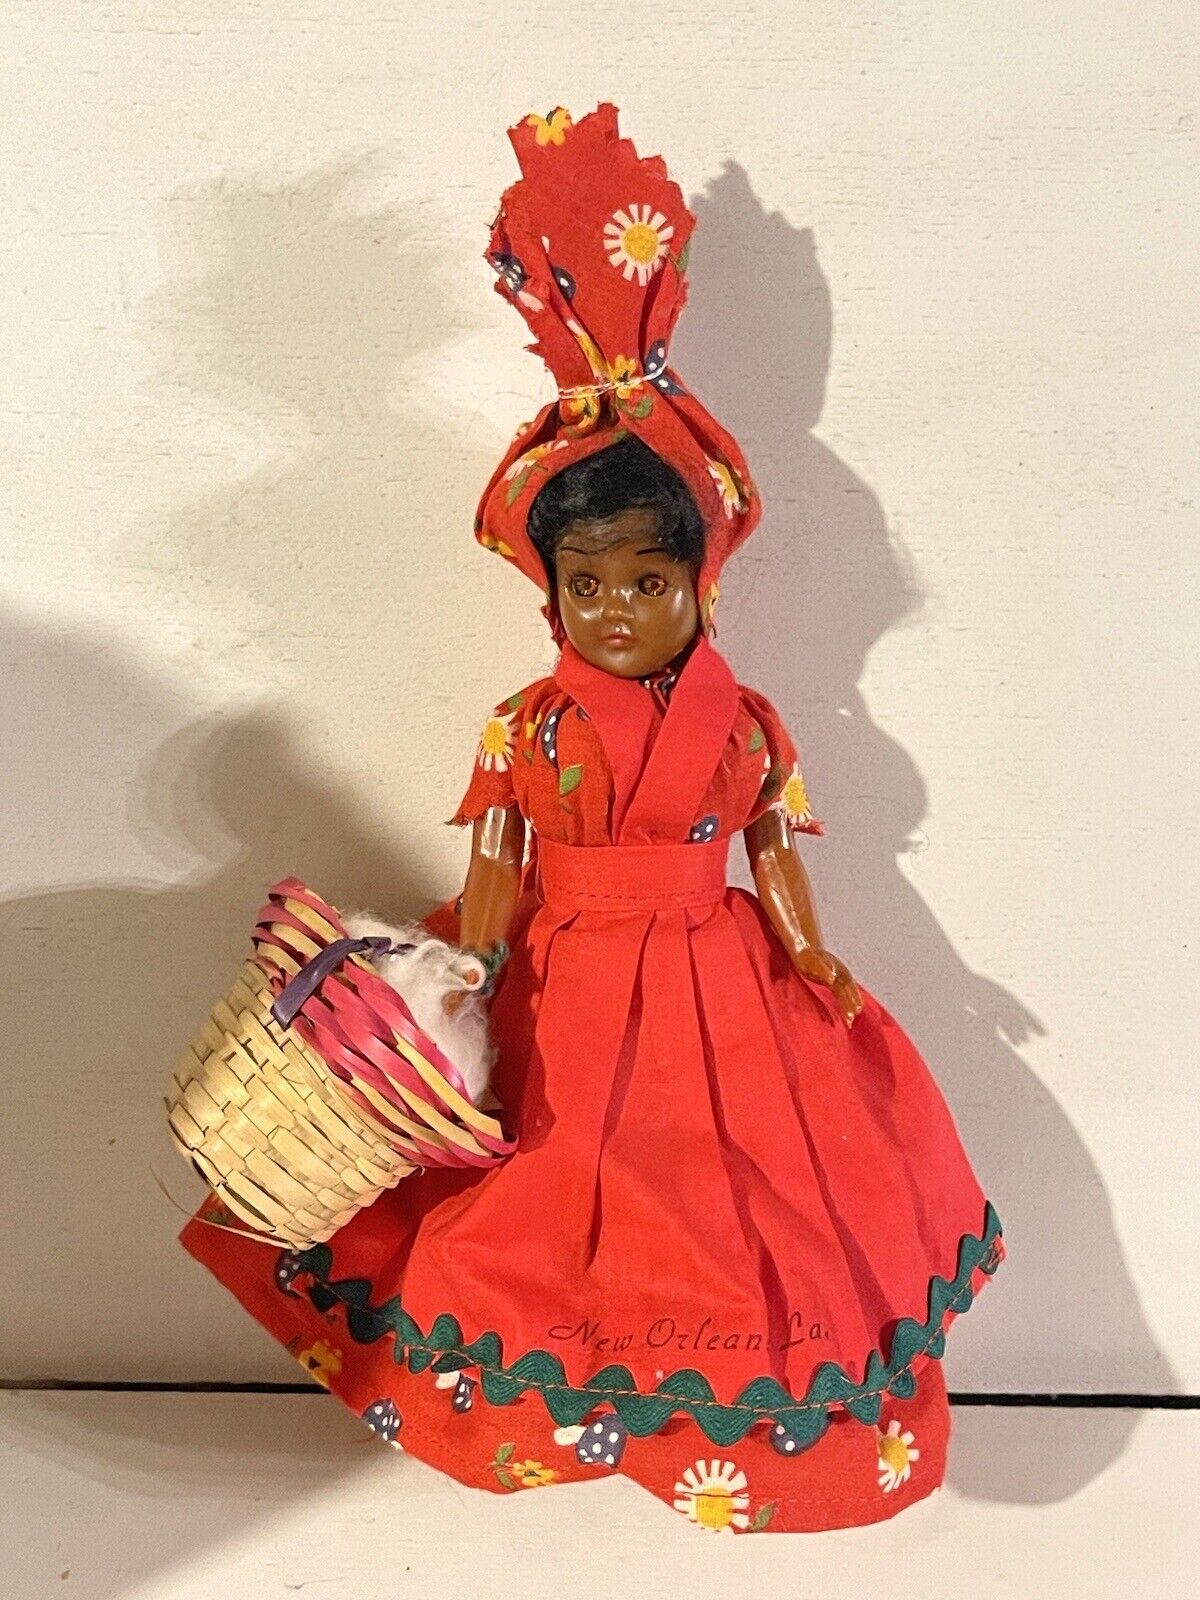 Vintage Creole Doll from New Orleans in Red Dress and Head Scarf with Basket 8”